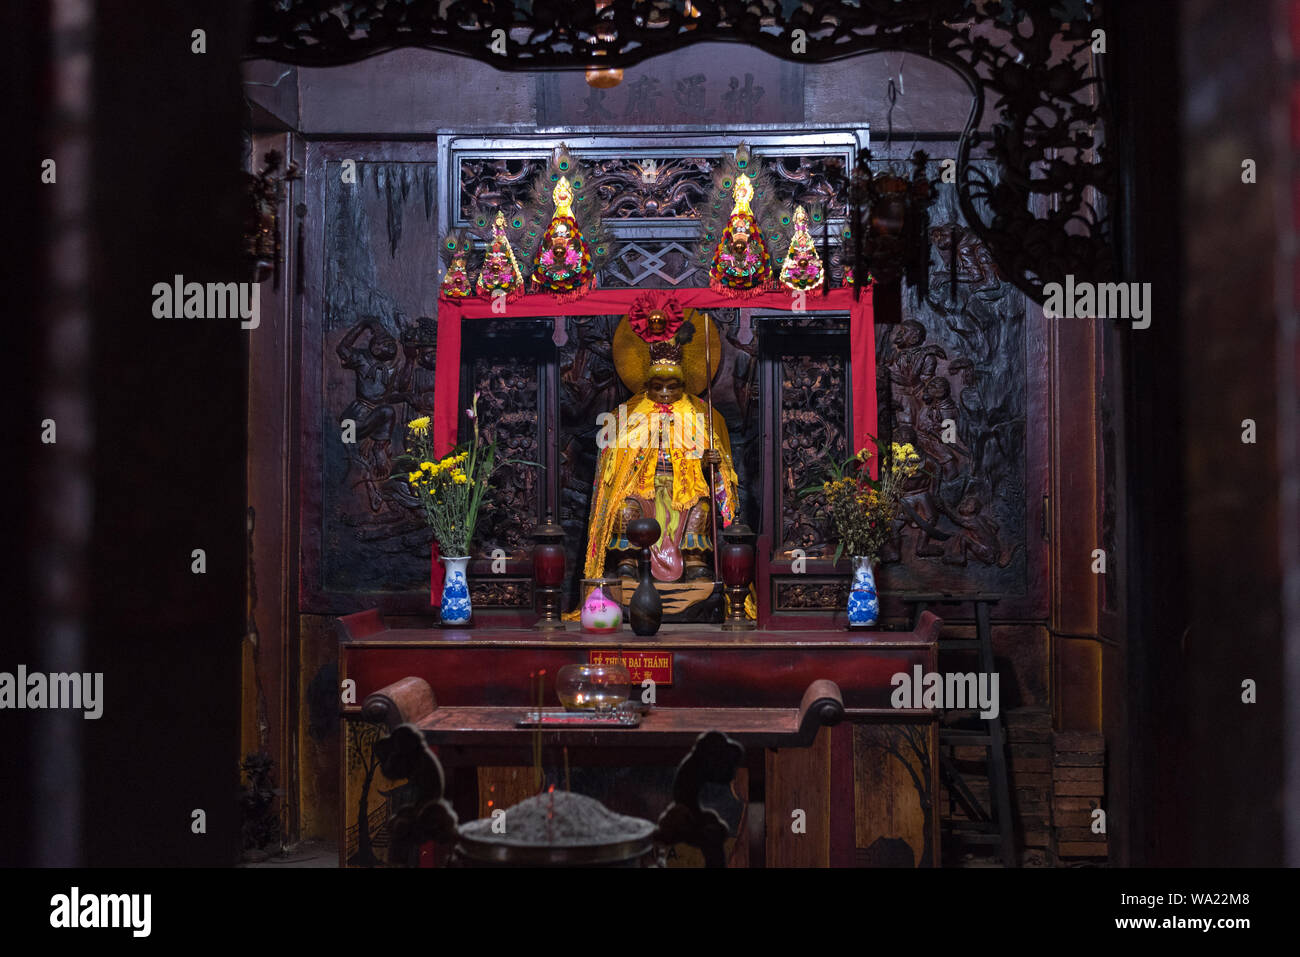 Ho Chi Minh City, Vietnam: an altar of Ha Chuong Hoi Quan pagoda with a statue of Hanuman and wooden carving depicting army of monkeys. Stock Photo